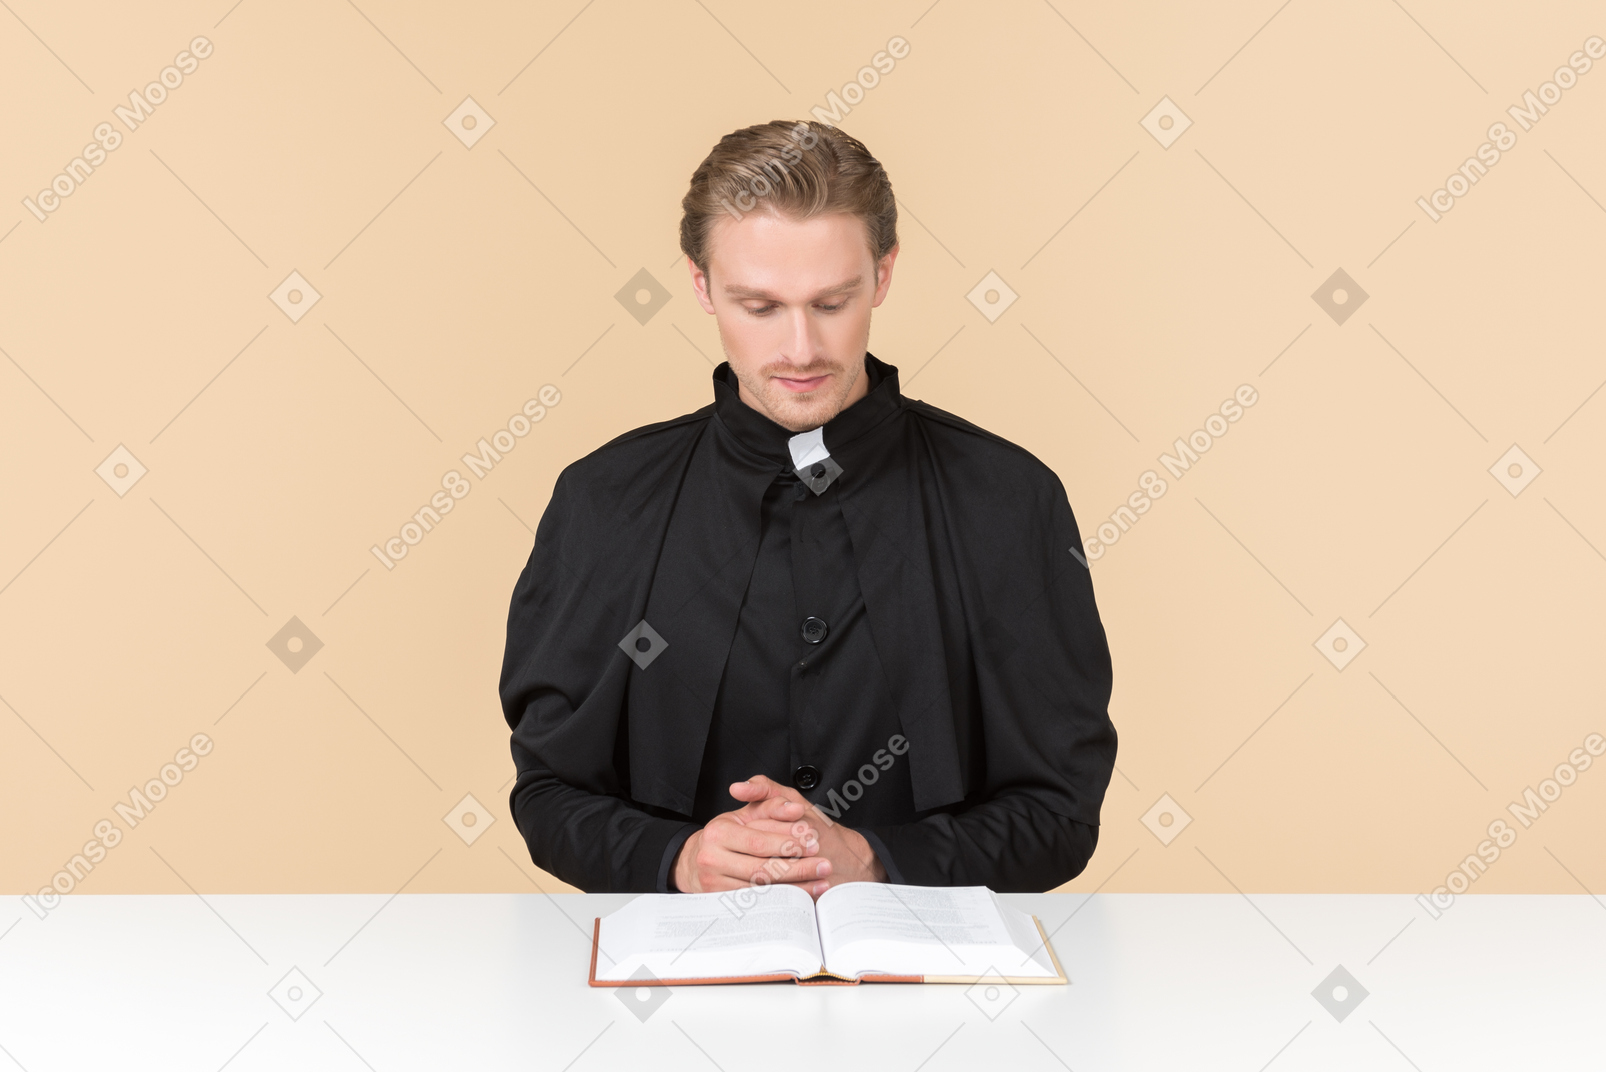 Catholic priest sitting at the table and reading a bible